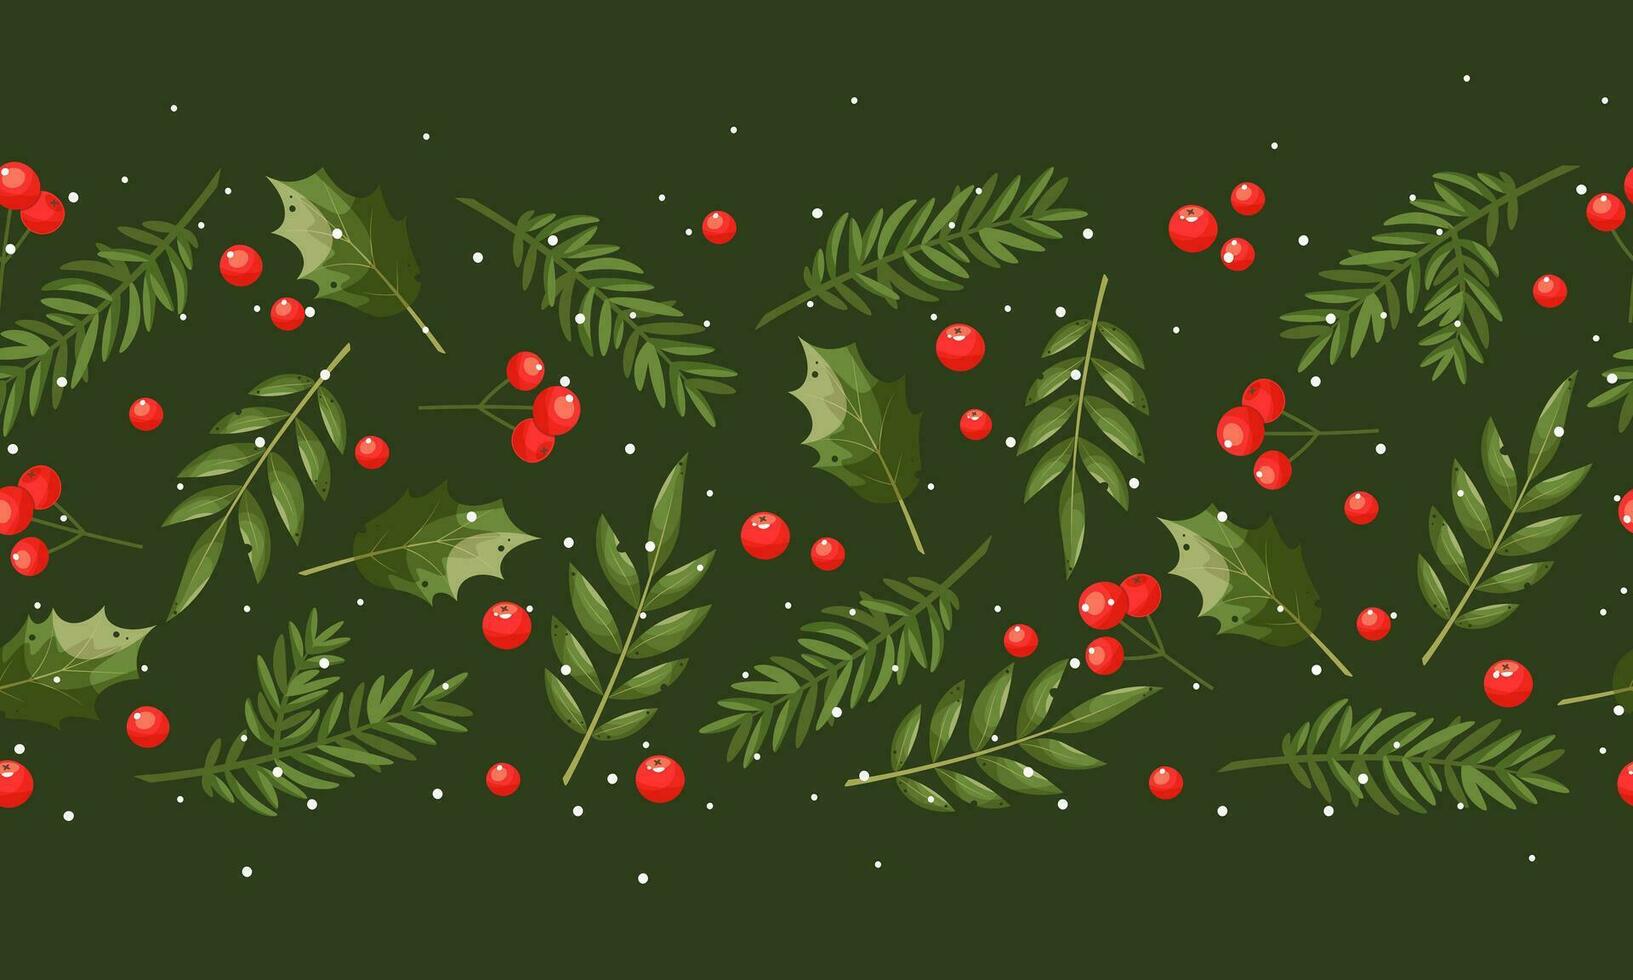 Xmas nature design seamless border, frame. Green pine, fir twigs, red berries on dark green background. Vector illustration. Greeting banner template, headers, posters. New Year's symbols.